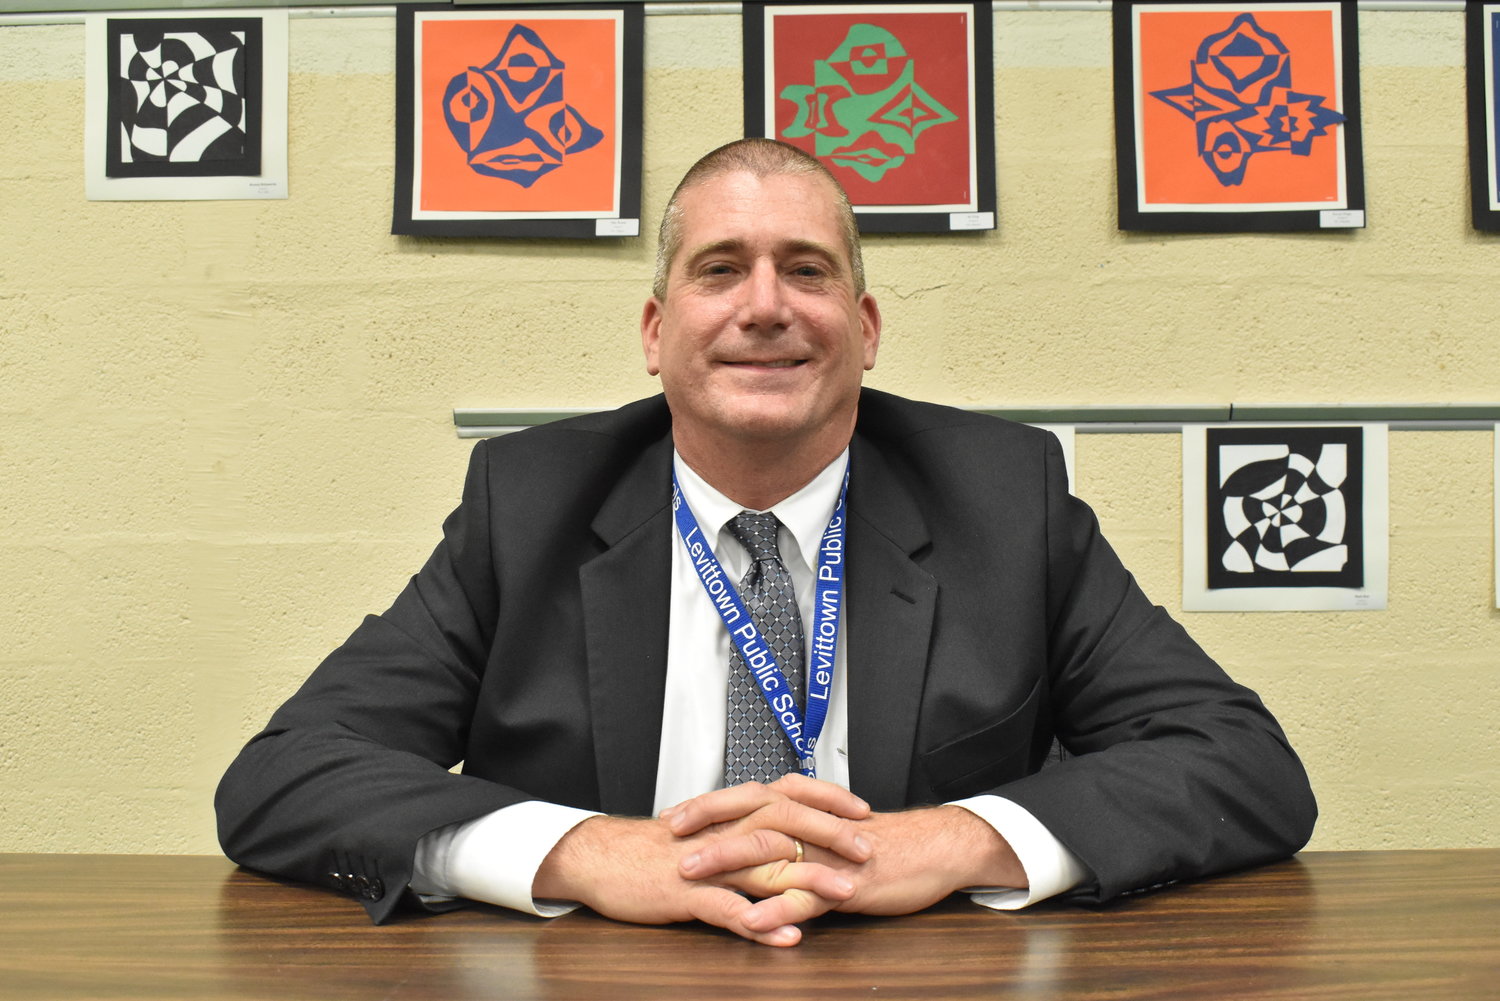 Todd Winch previously served as a social studies teacher and then assistant superintendent for Levittown Schools, before taking over the top job from Tonie McDonald.